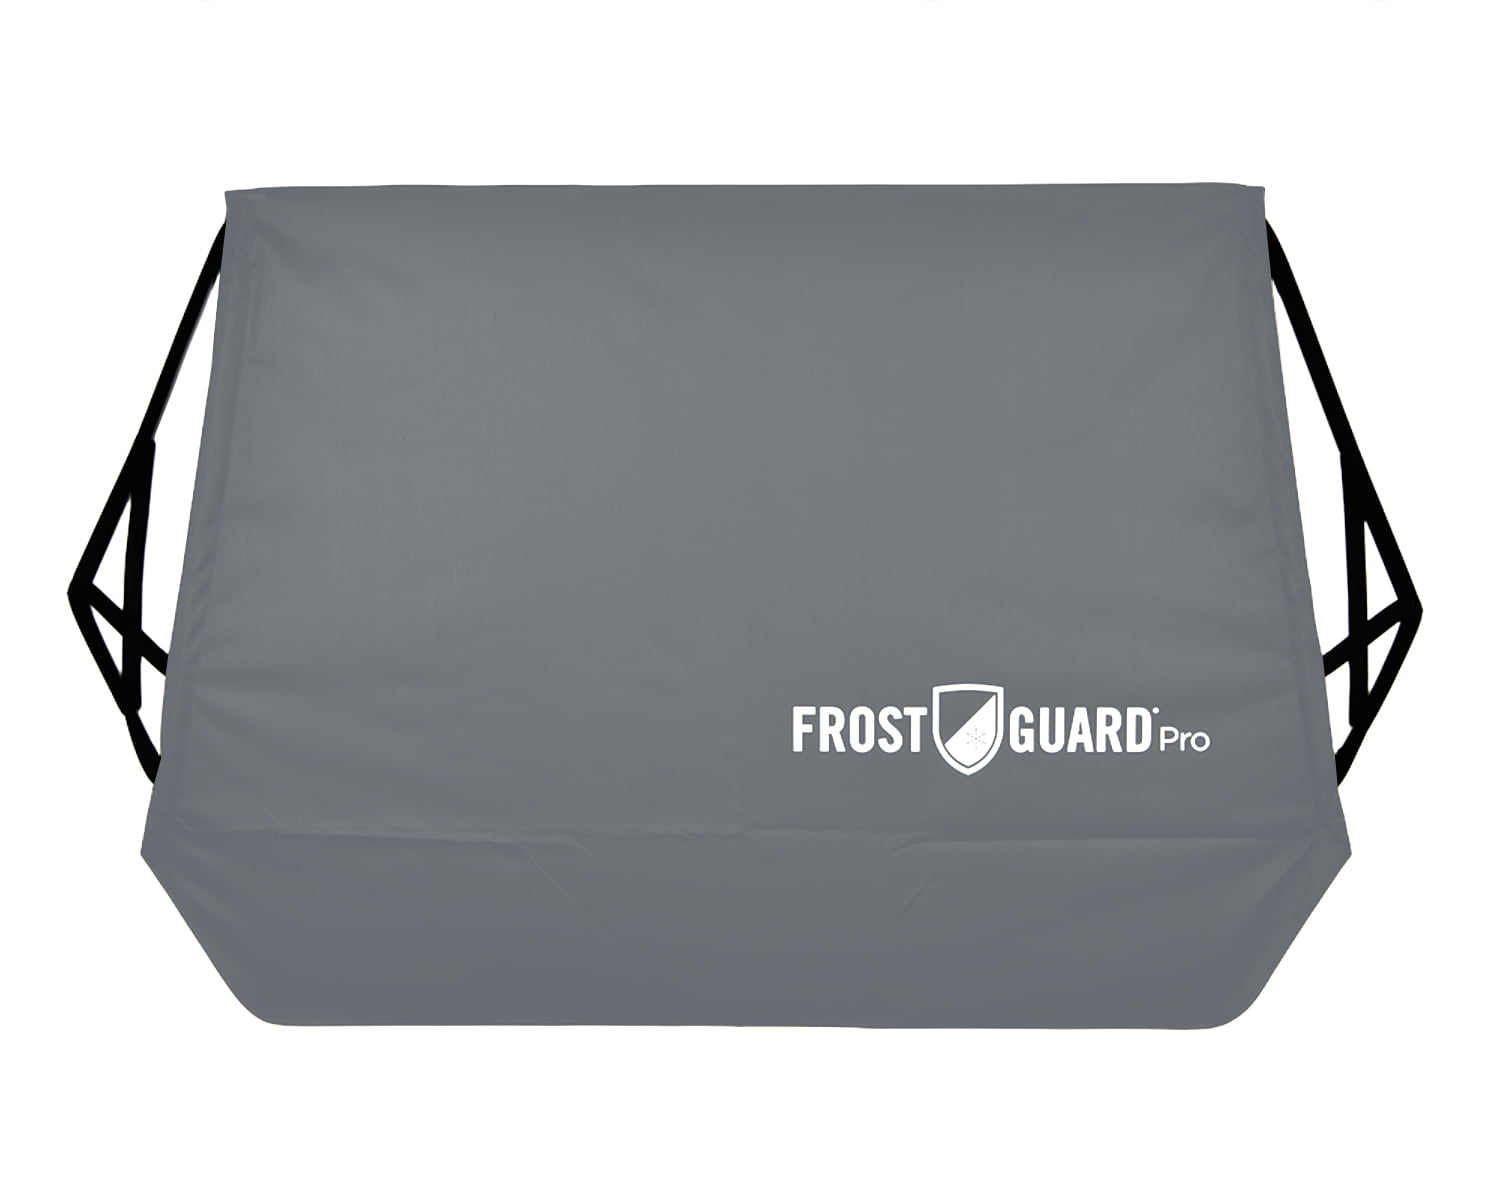 Frost Guard Plus Winter Windshield Cover, XL for SUVs and Trucks, Black